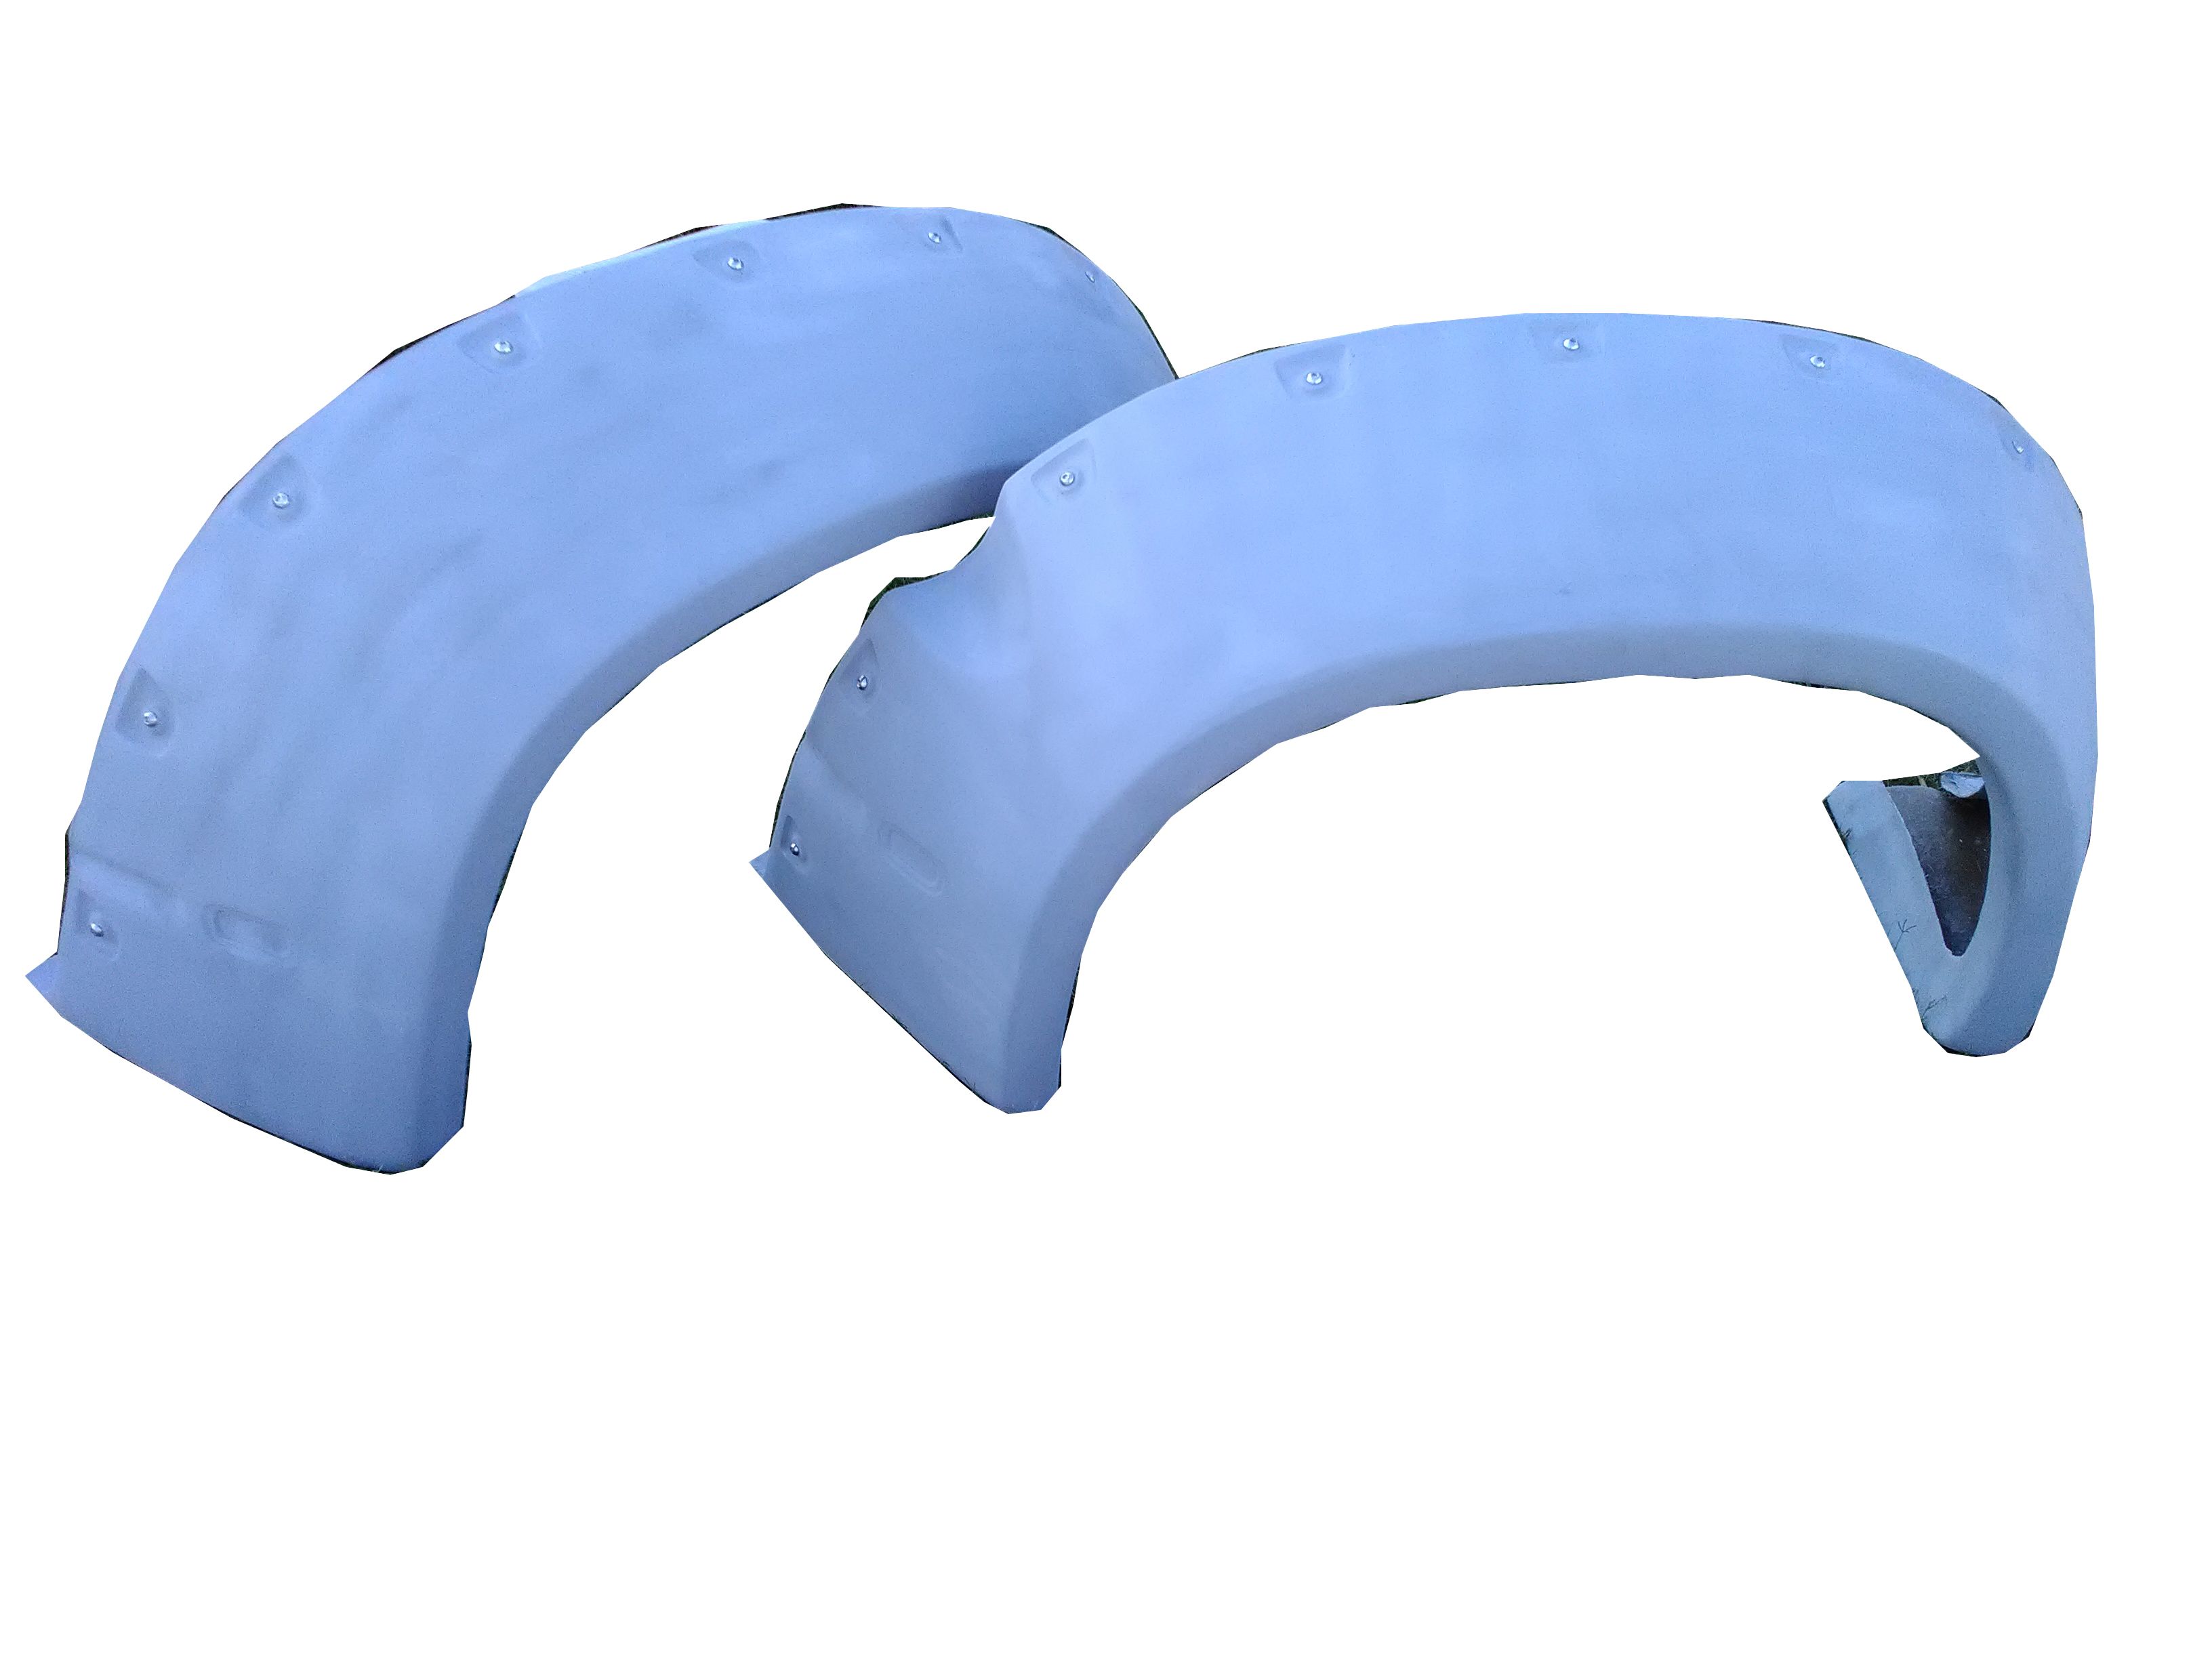 dodge ram 2500/3500  dually  fenders short bed  2003-2009
extra wider 